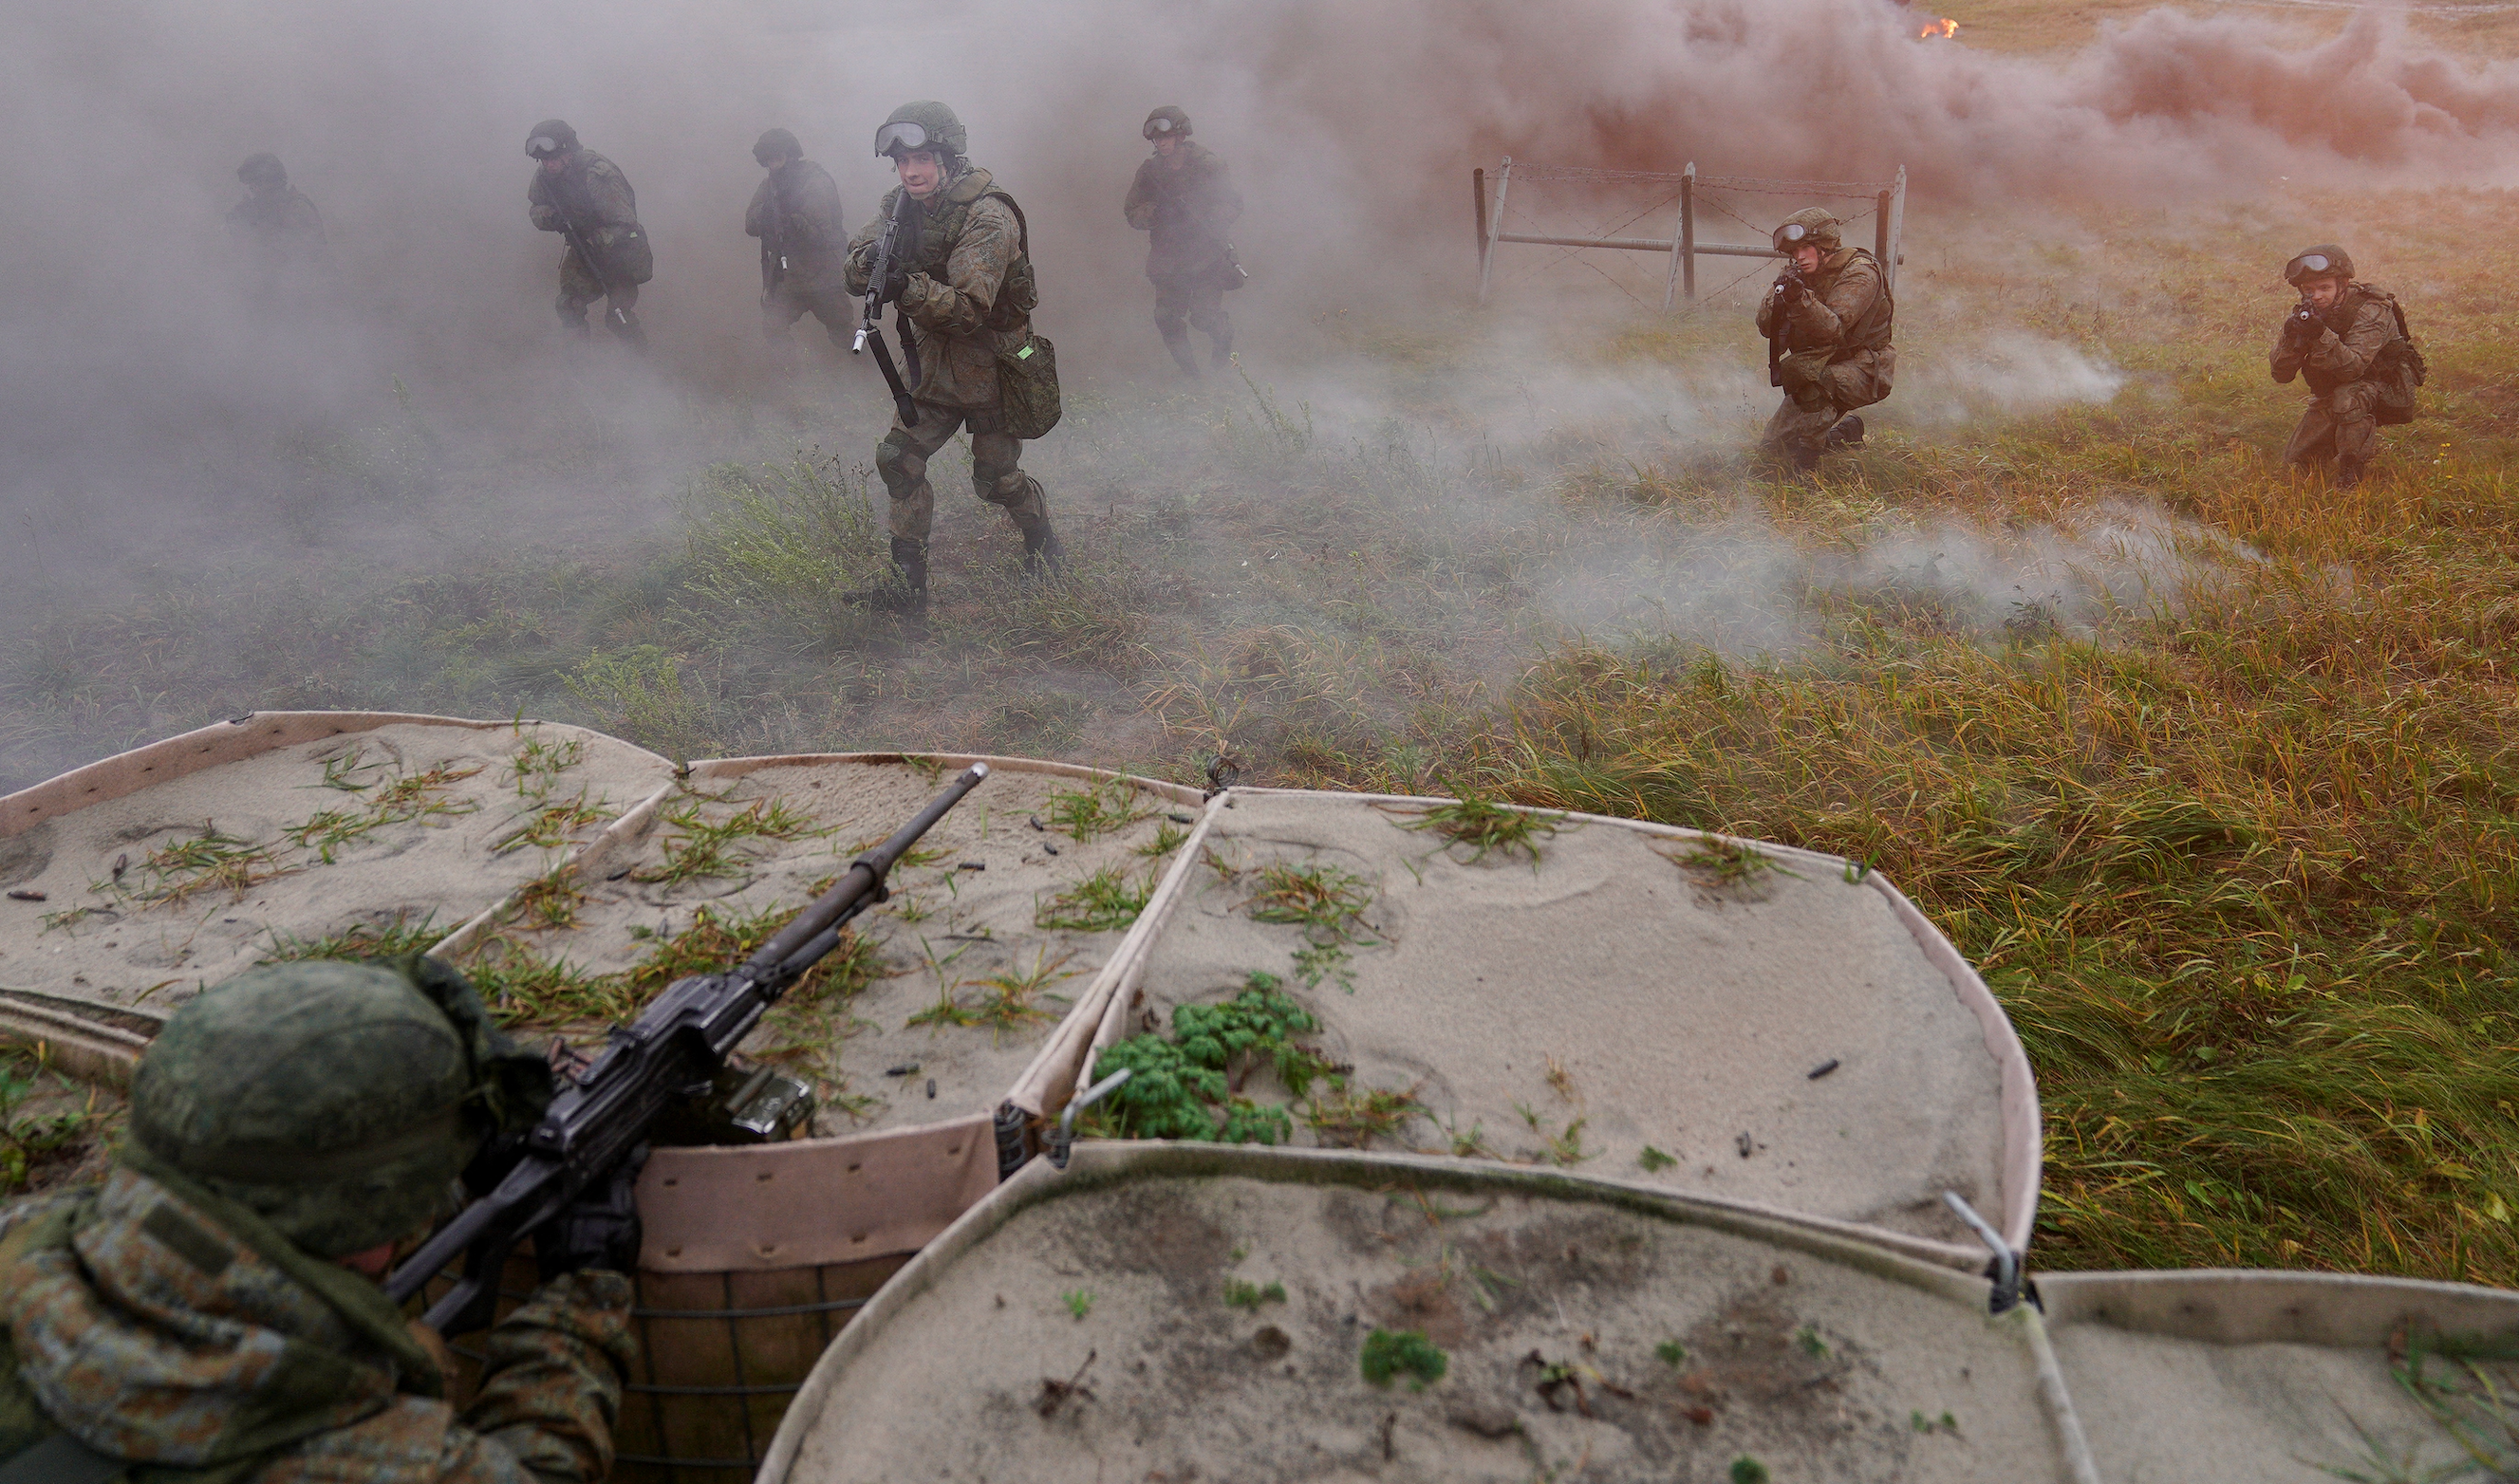 Russian forces near Norway at “20% or less” than before Ukraine war, Norwegian military says